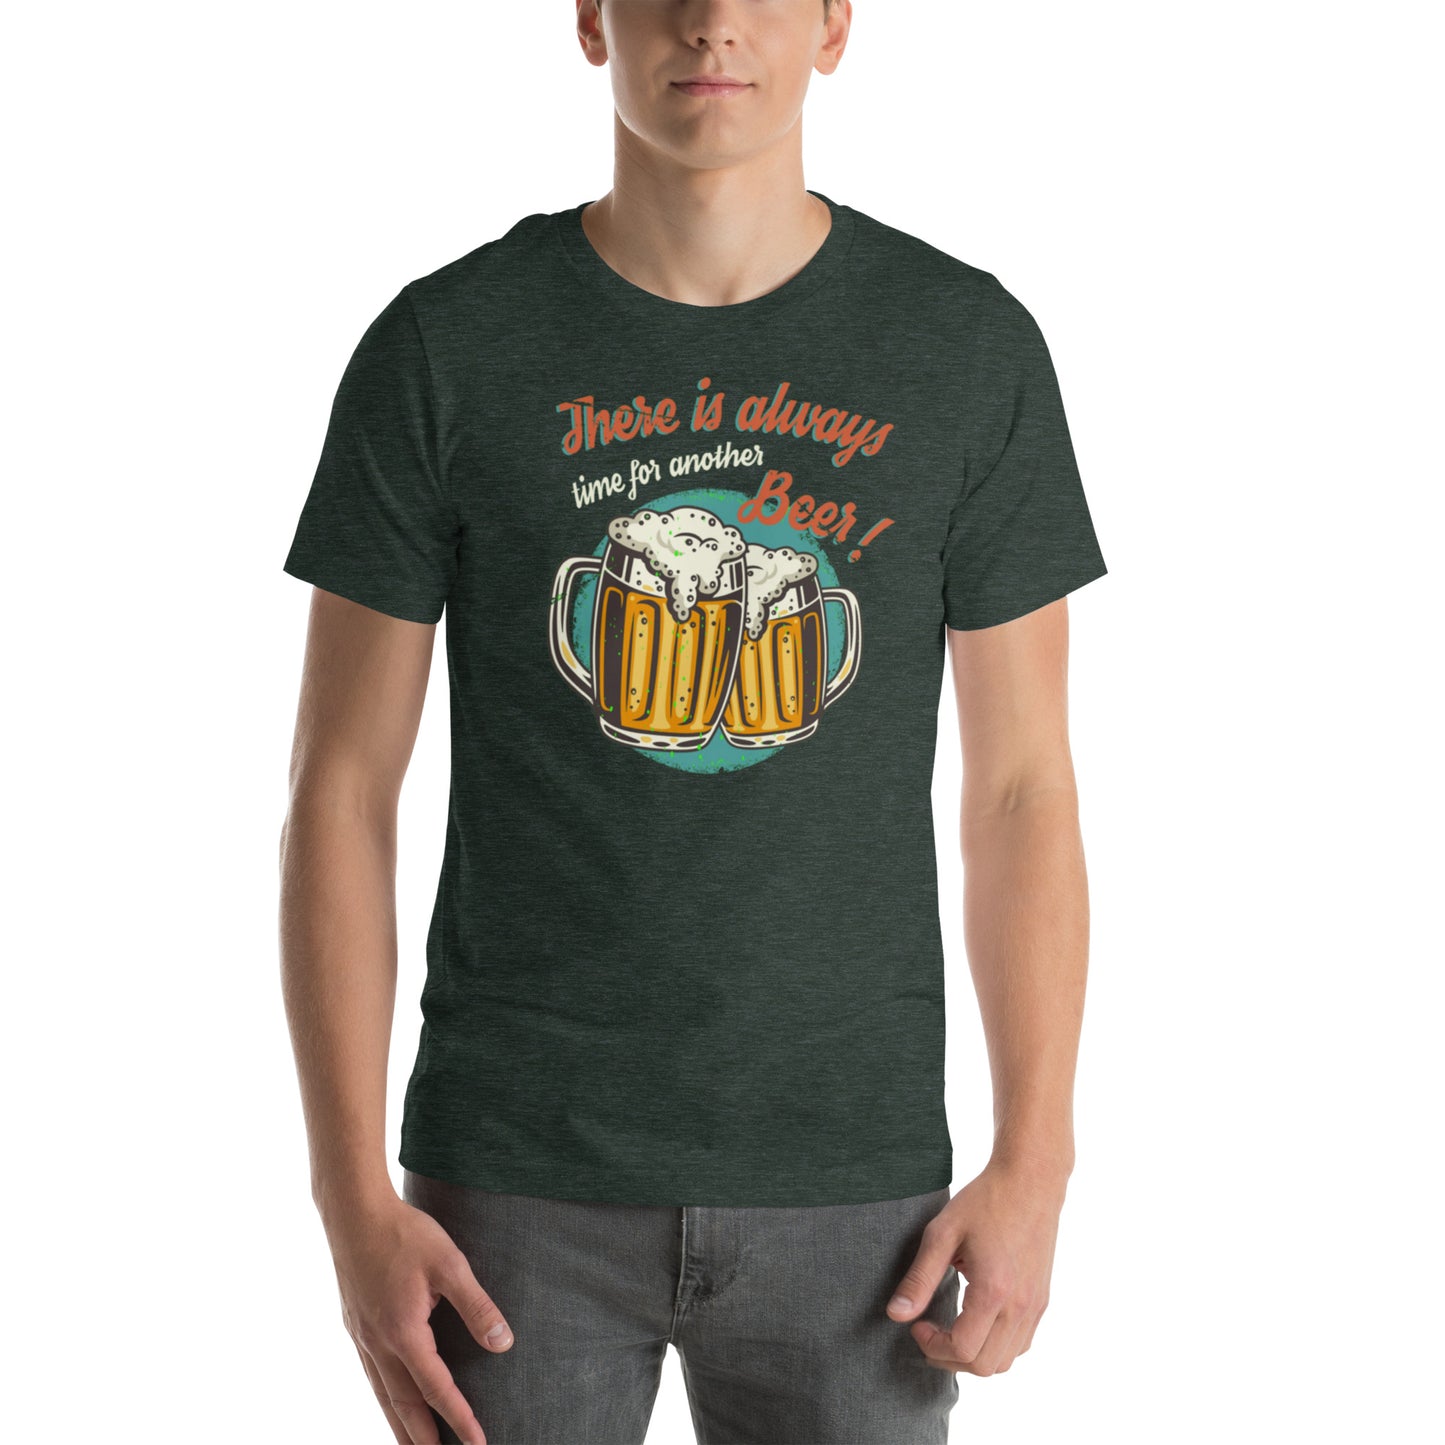 There Is Always Time For Another Beer Unisex t-shirt